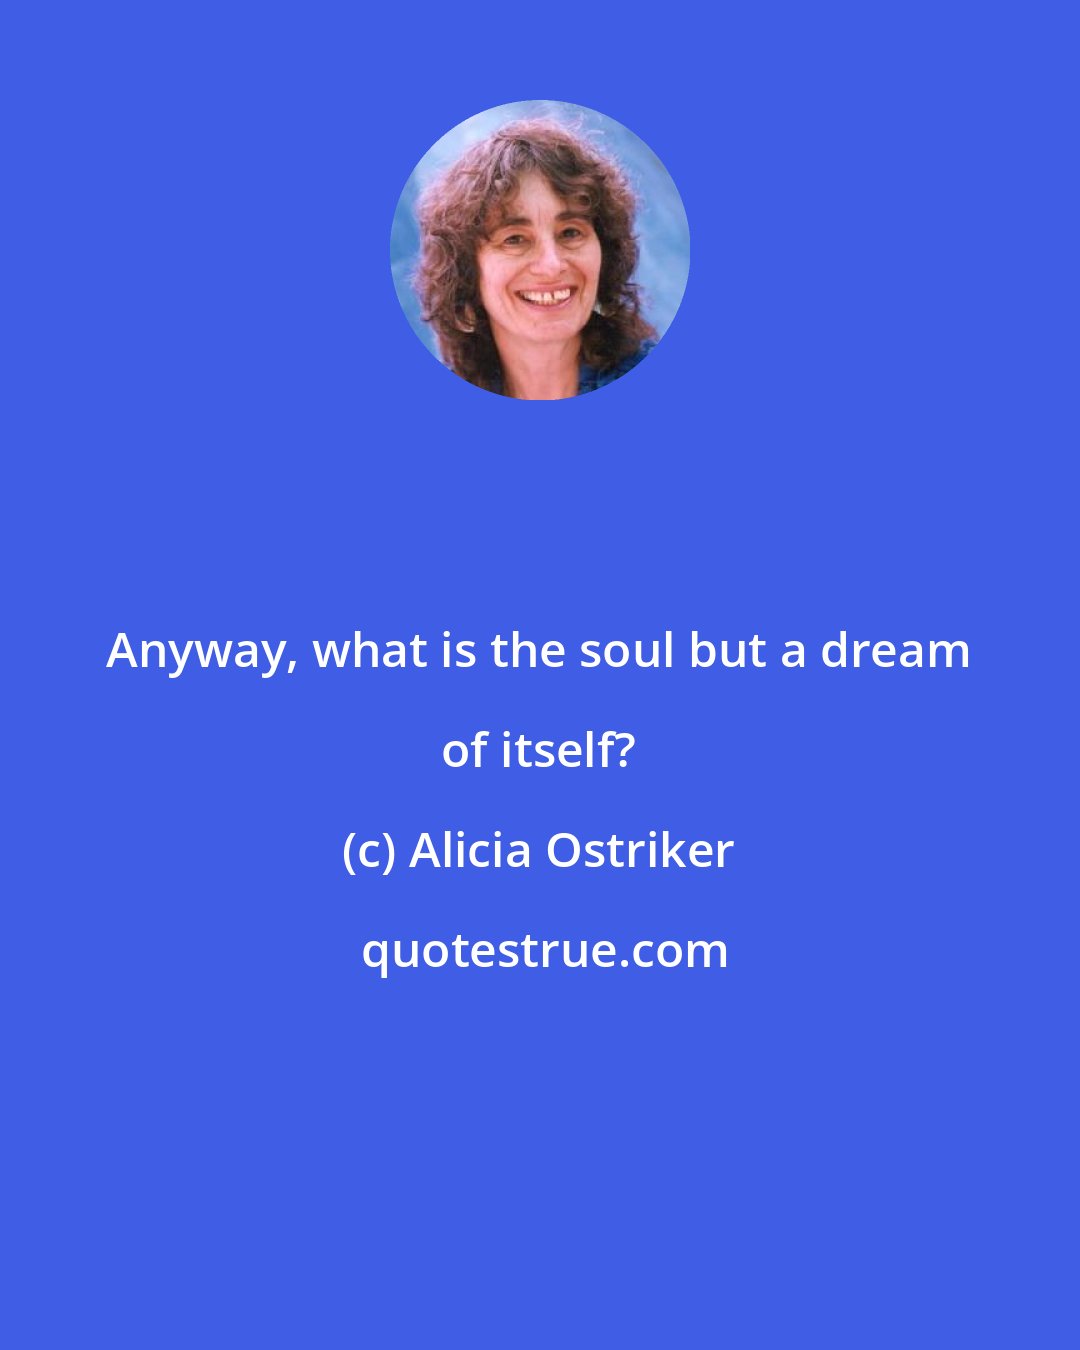 Alicia Ostriker: Anyway, what is the soul but a dream of itself?